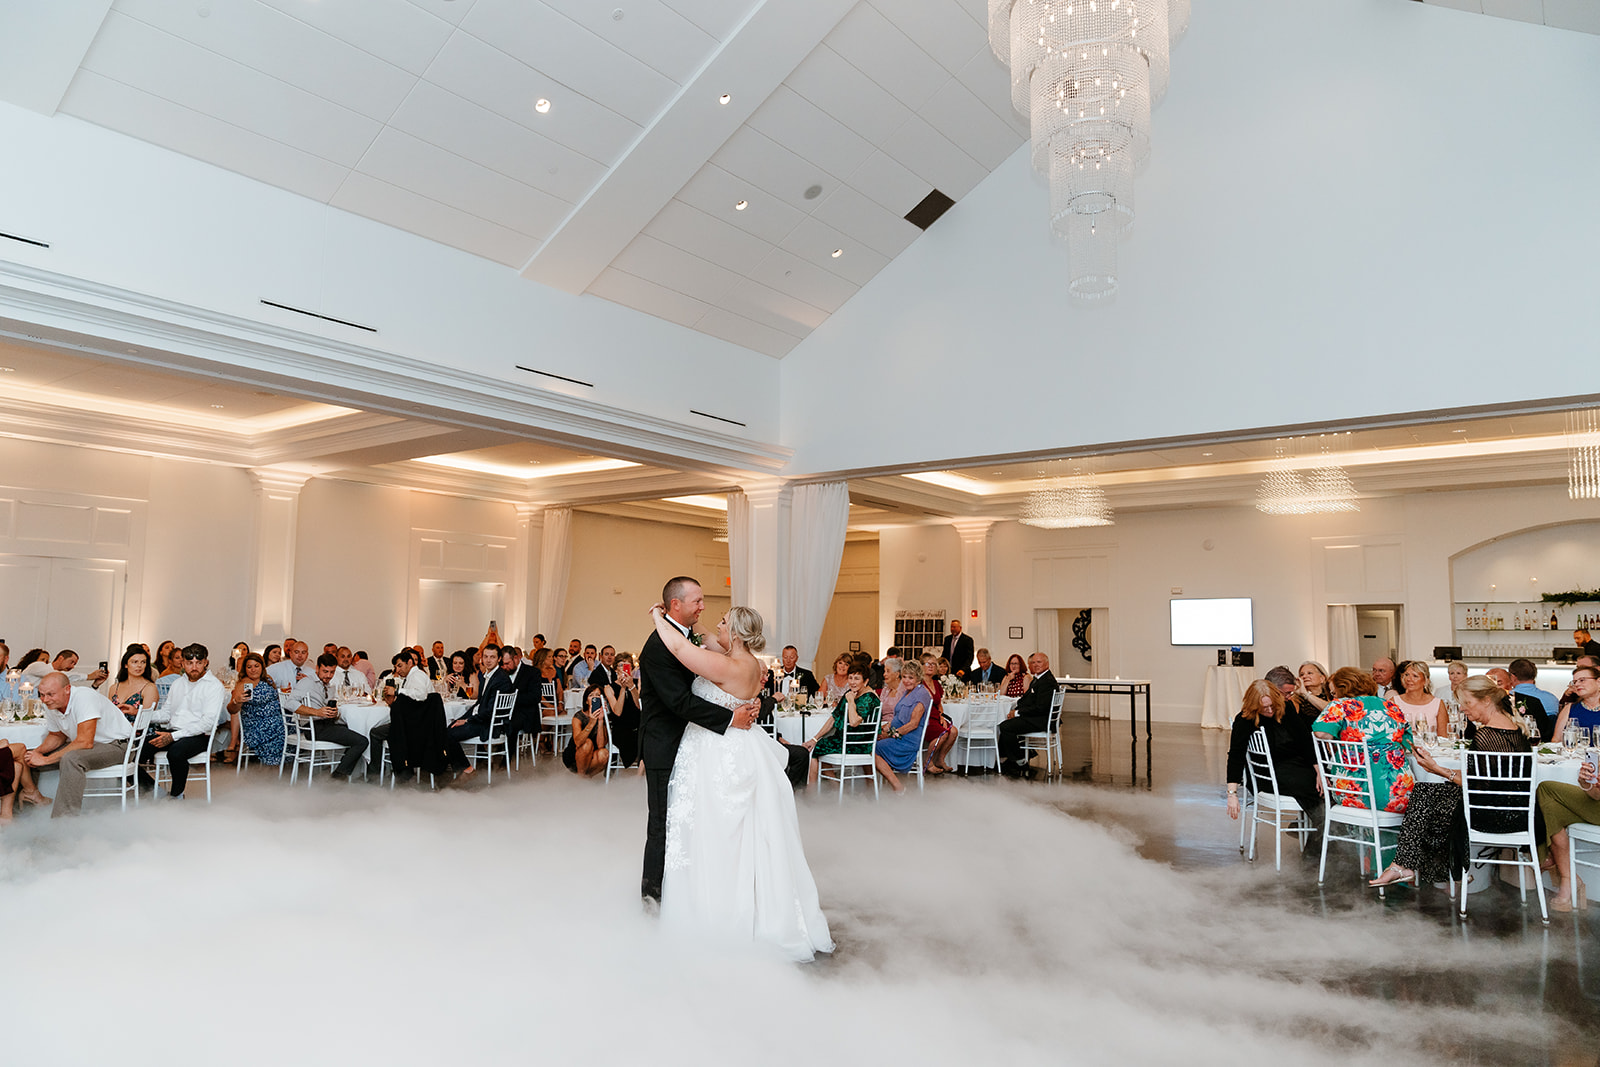 A couple shares their first dance amidst a cloud of fog on the dance floor while guests watch from their tables in a well-lit, elegant banquet hall.